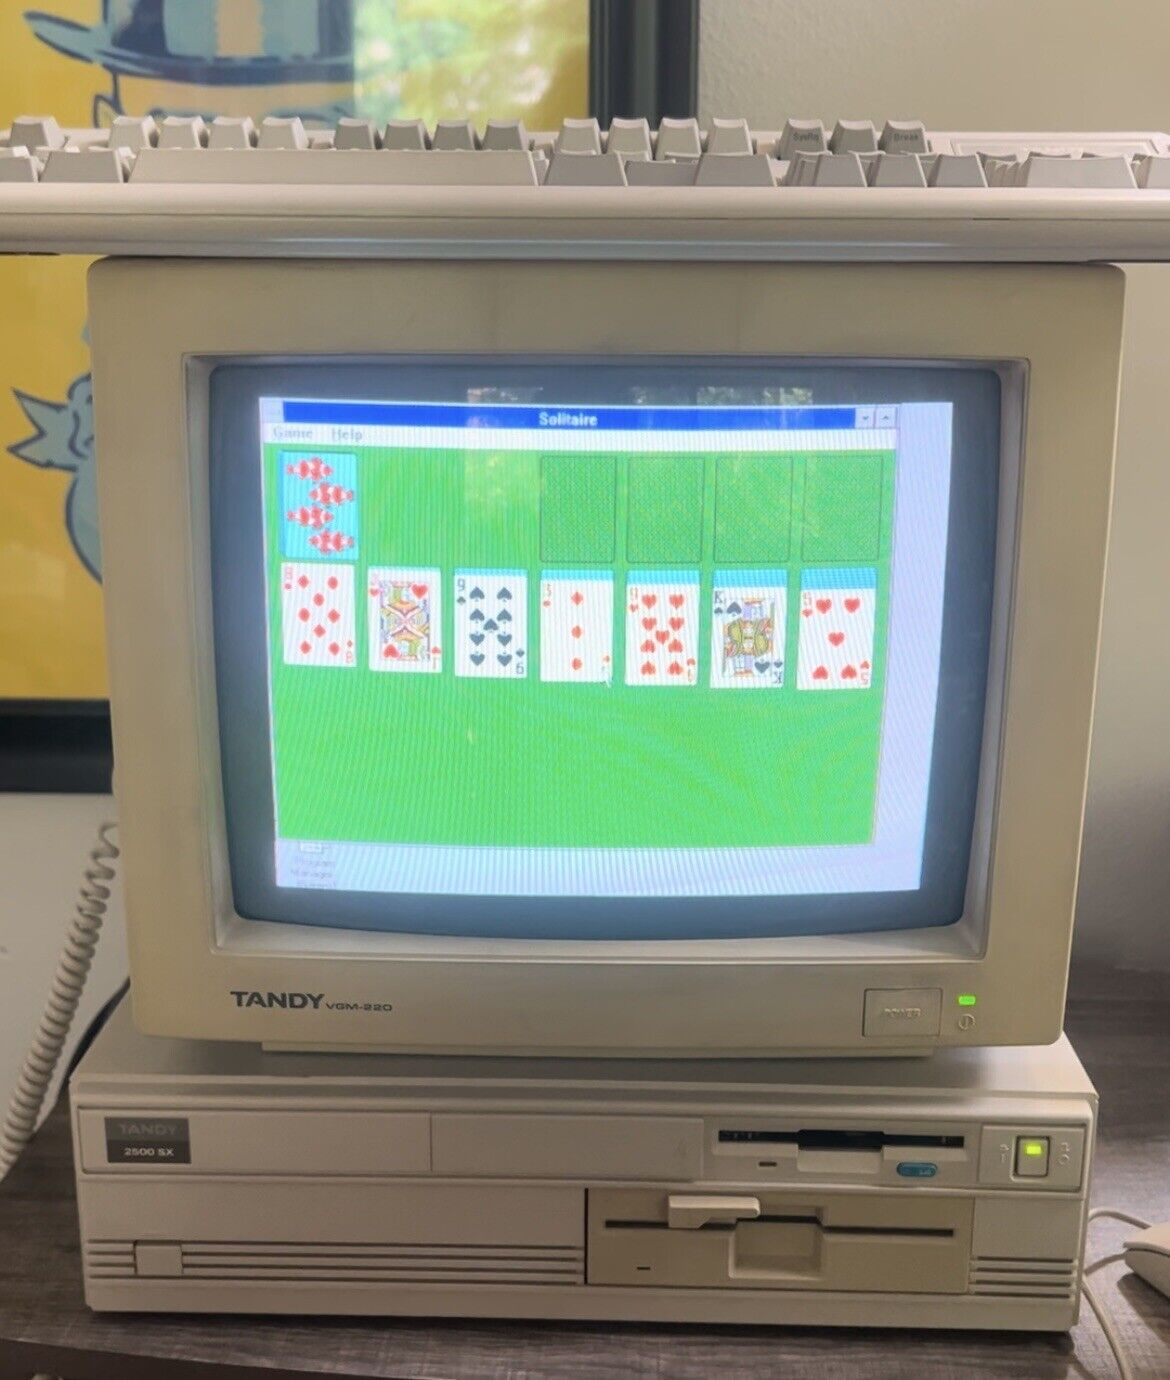 Tandy 2500SX/33 With Tandy VGM-220 Monitor With Enhanced Keyboard And Mouse